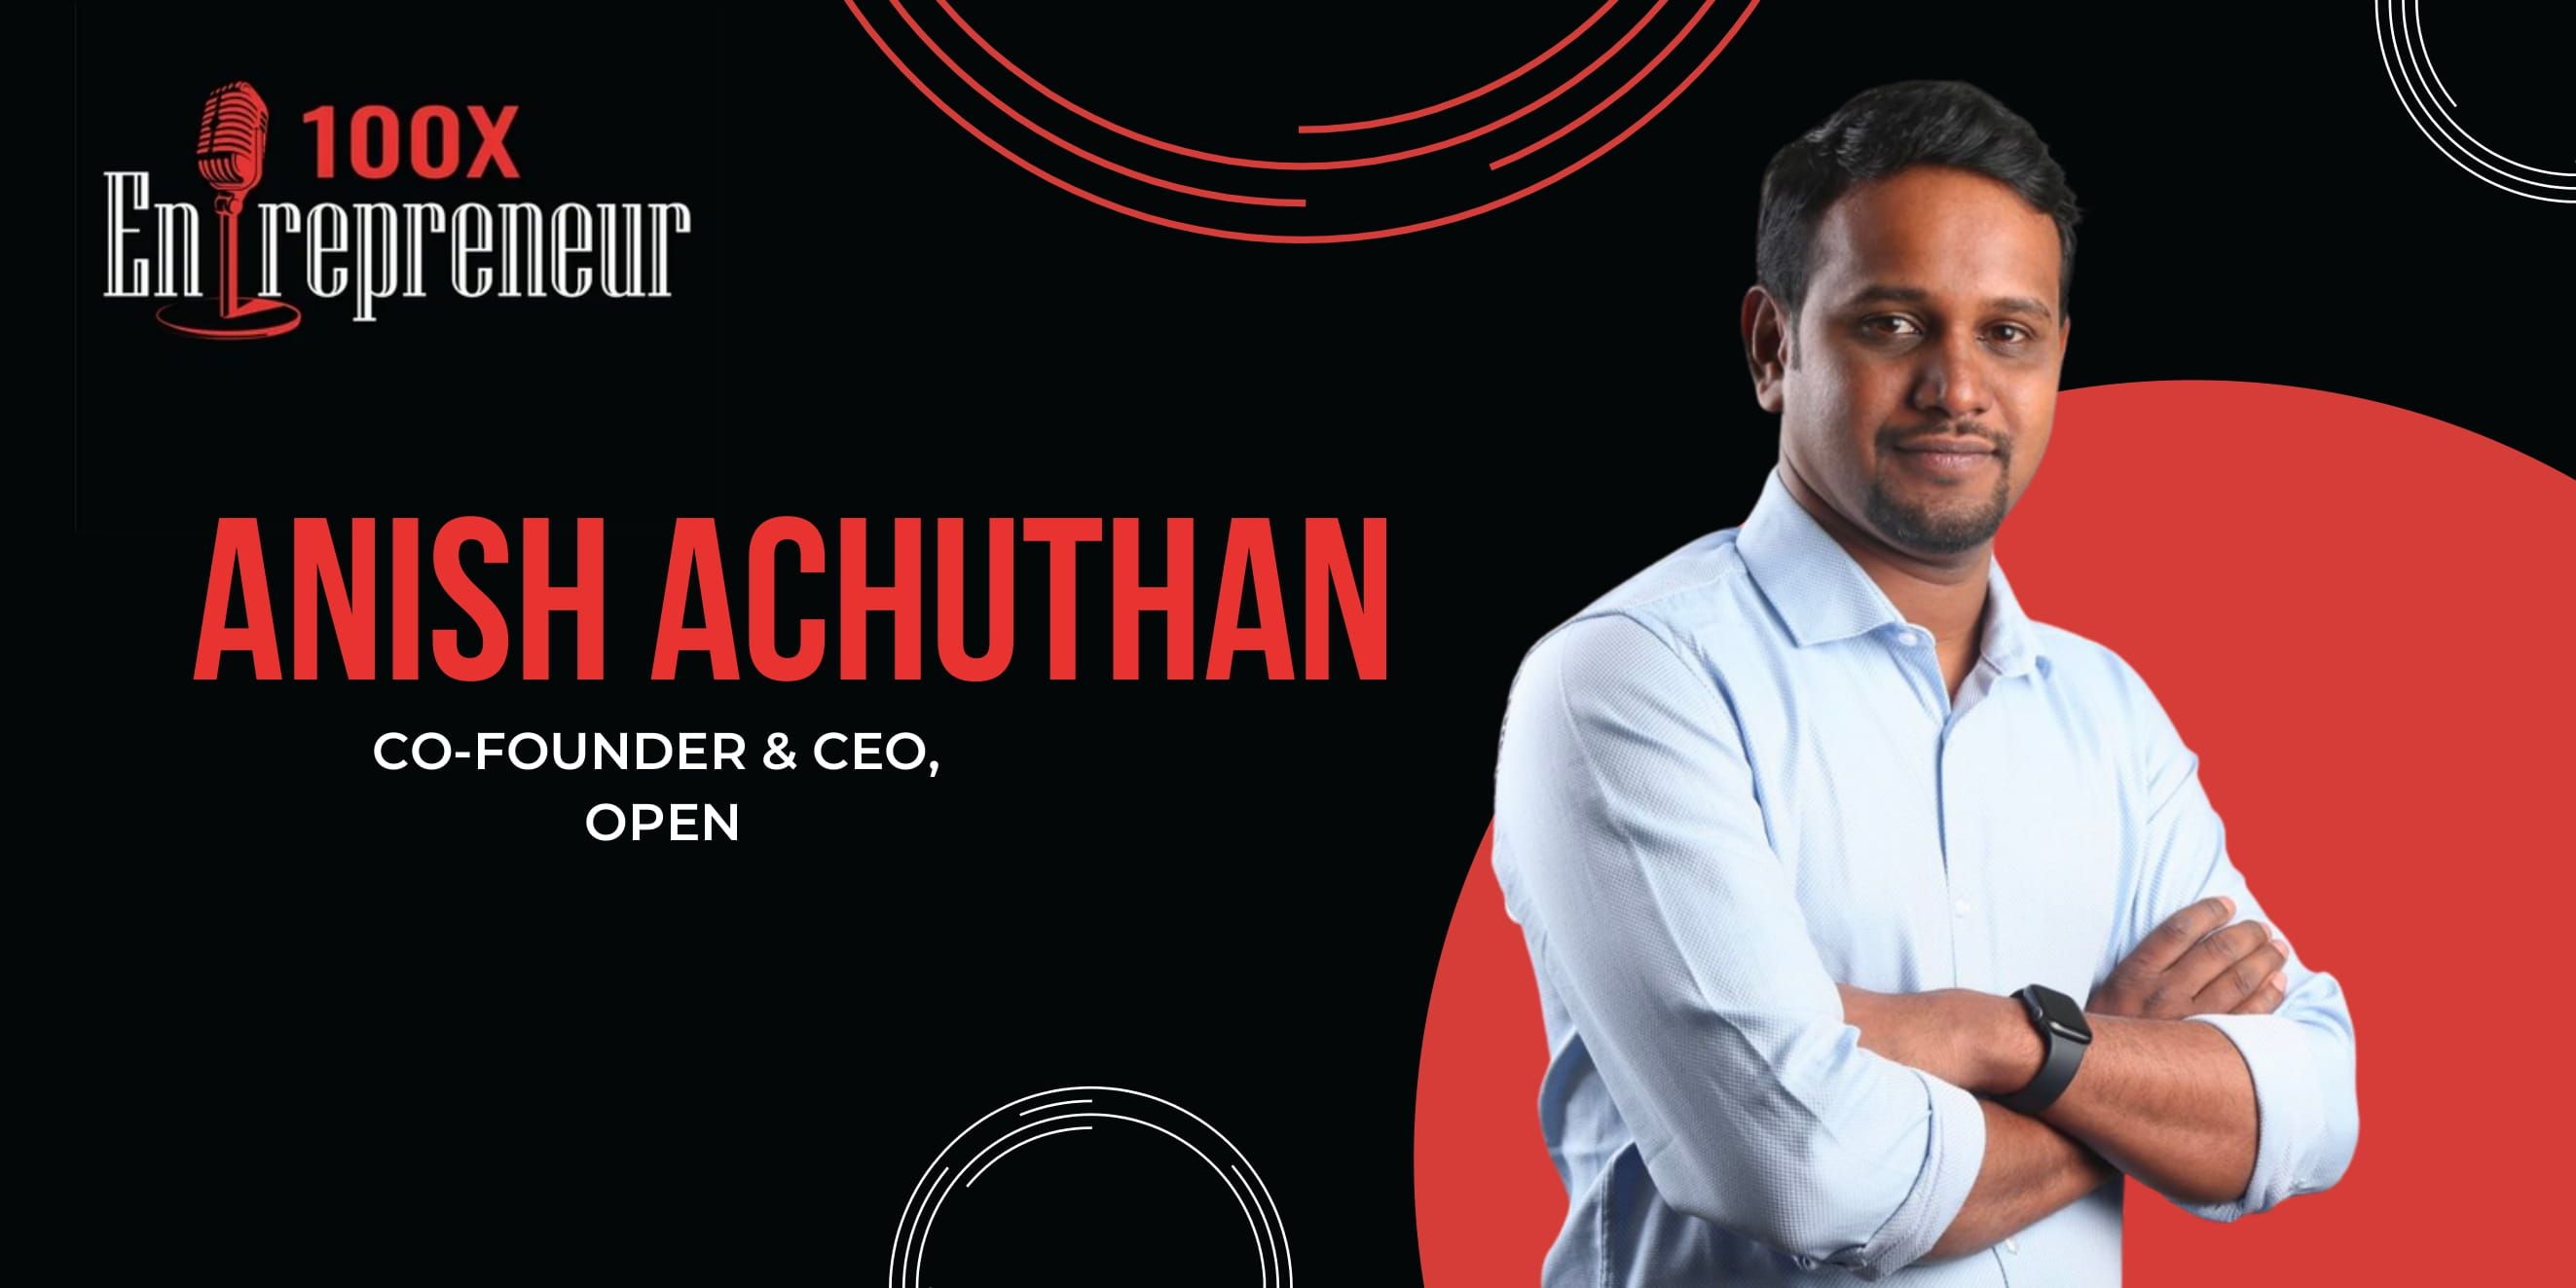 How a high school dropout went on to co-found Open, India's 100th unicorn